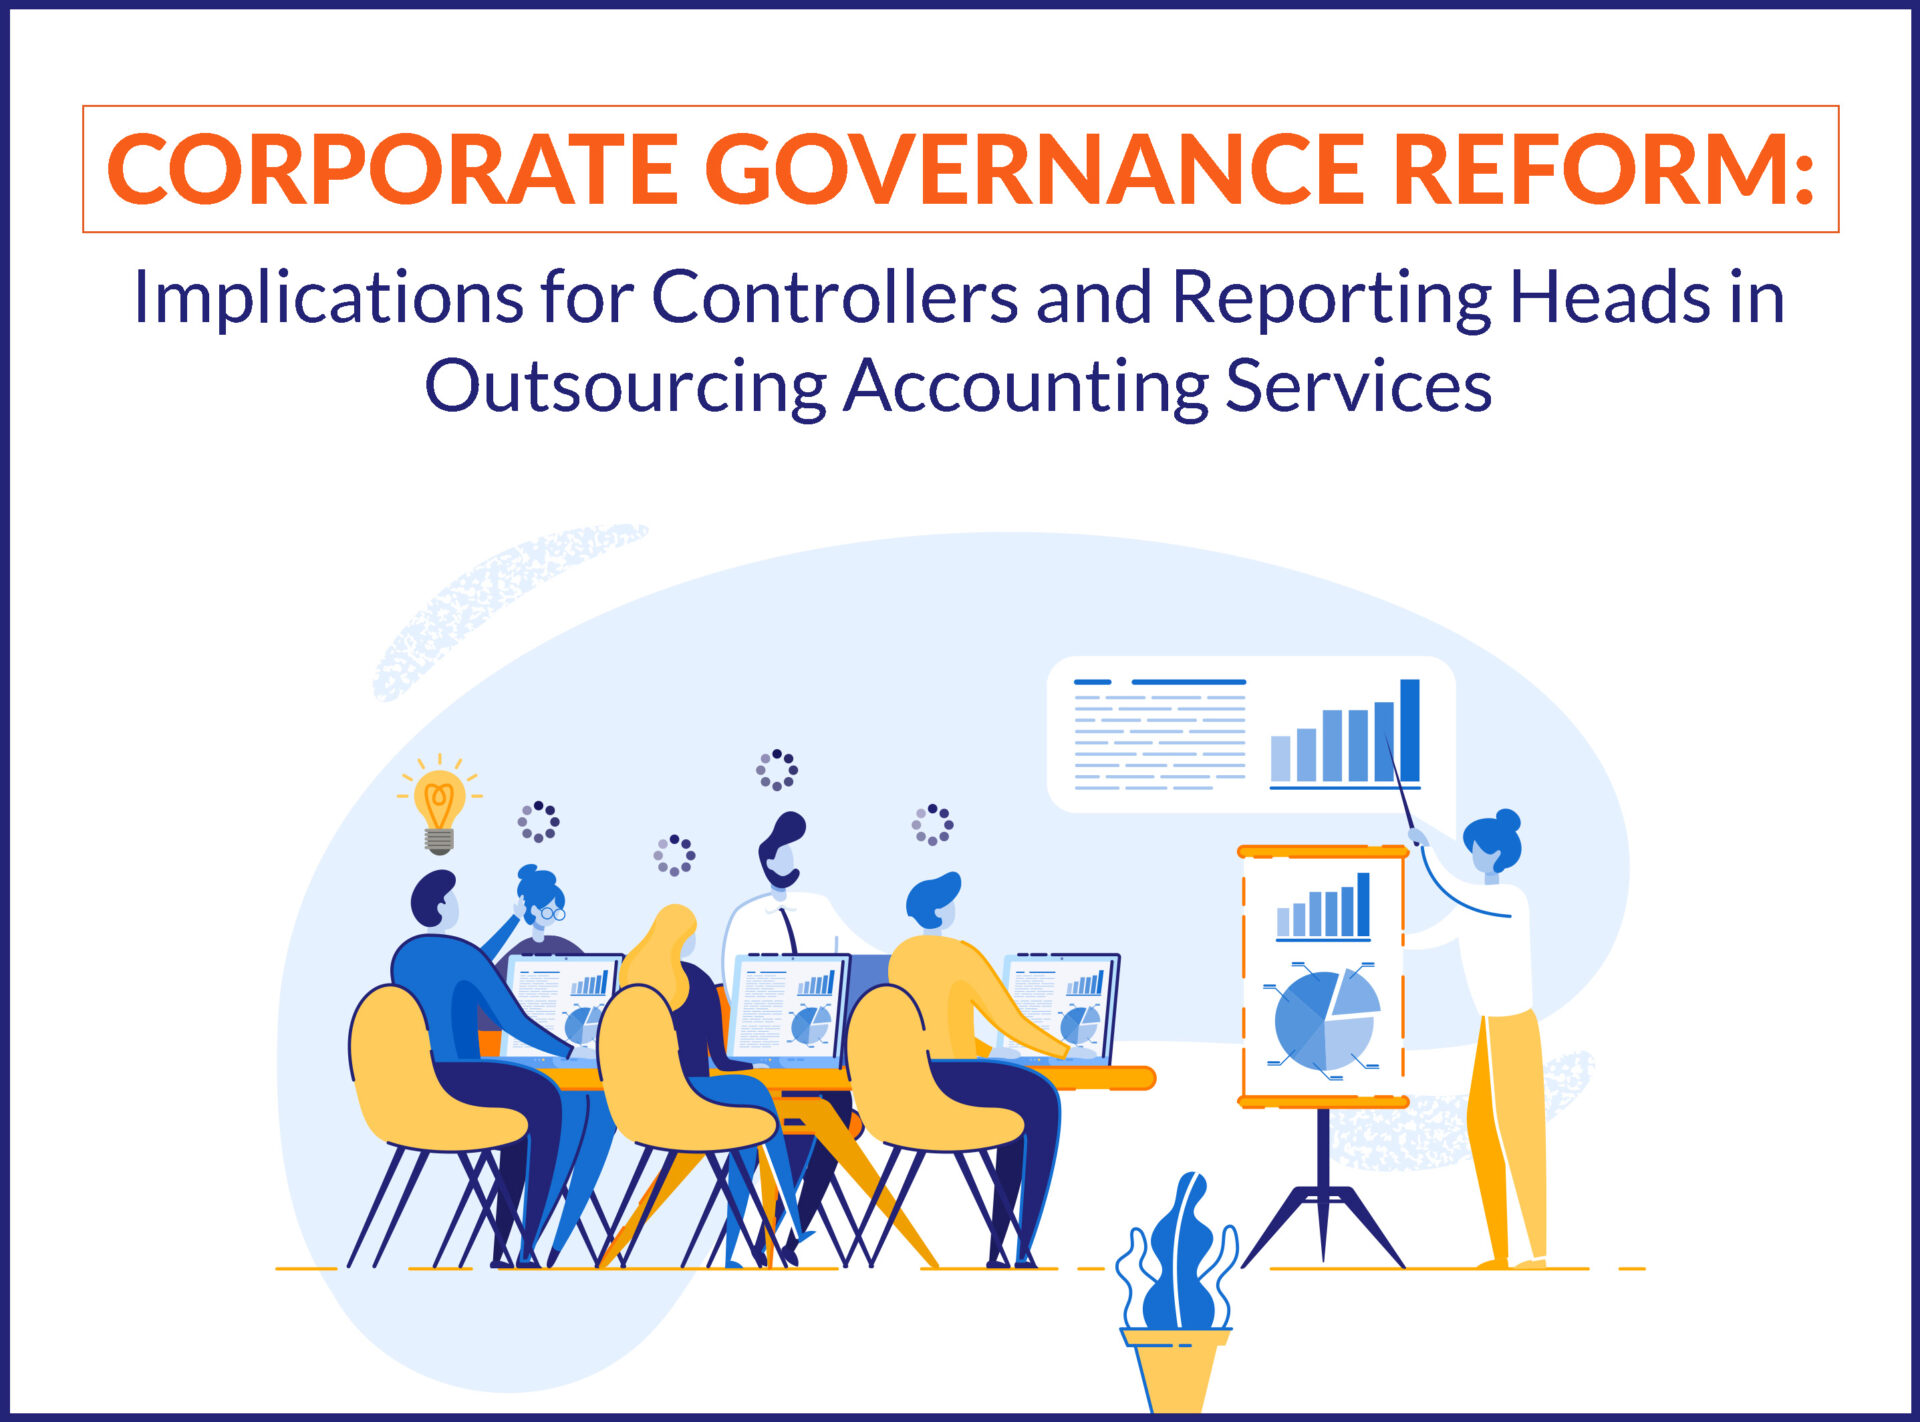 Corporate Governance Reform & Outsourcing Impact